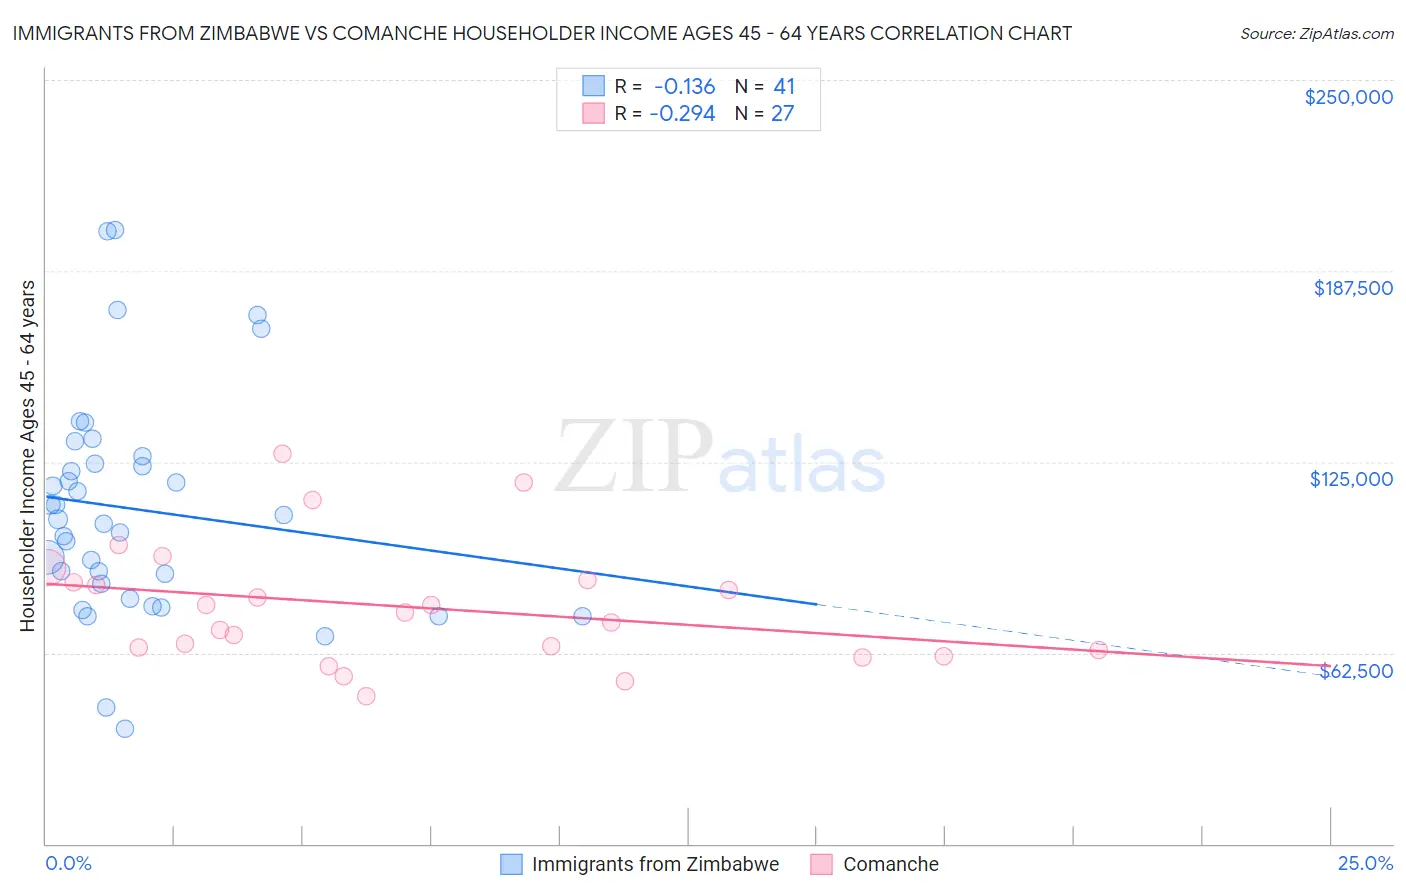 Immigrants from Zimbabwe vs Comanche Householder Income Ages 45 - 64 years